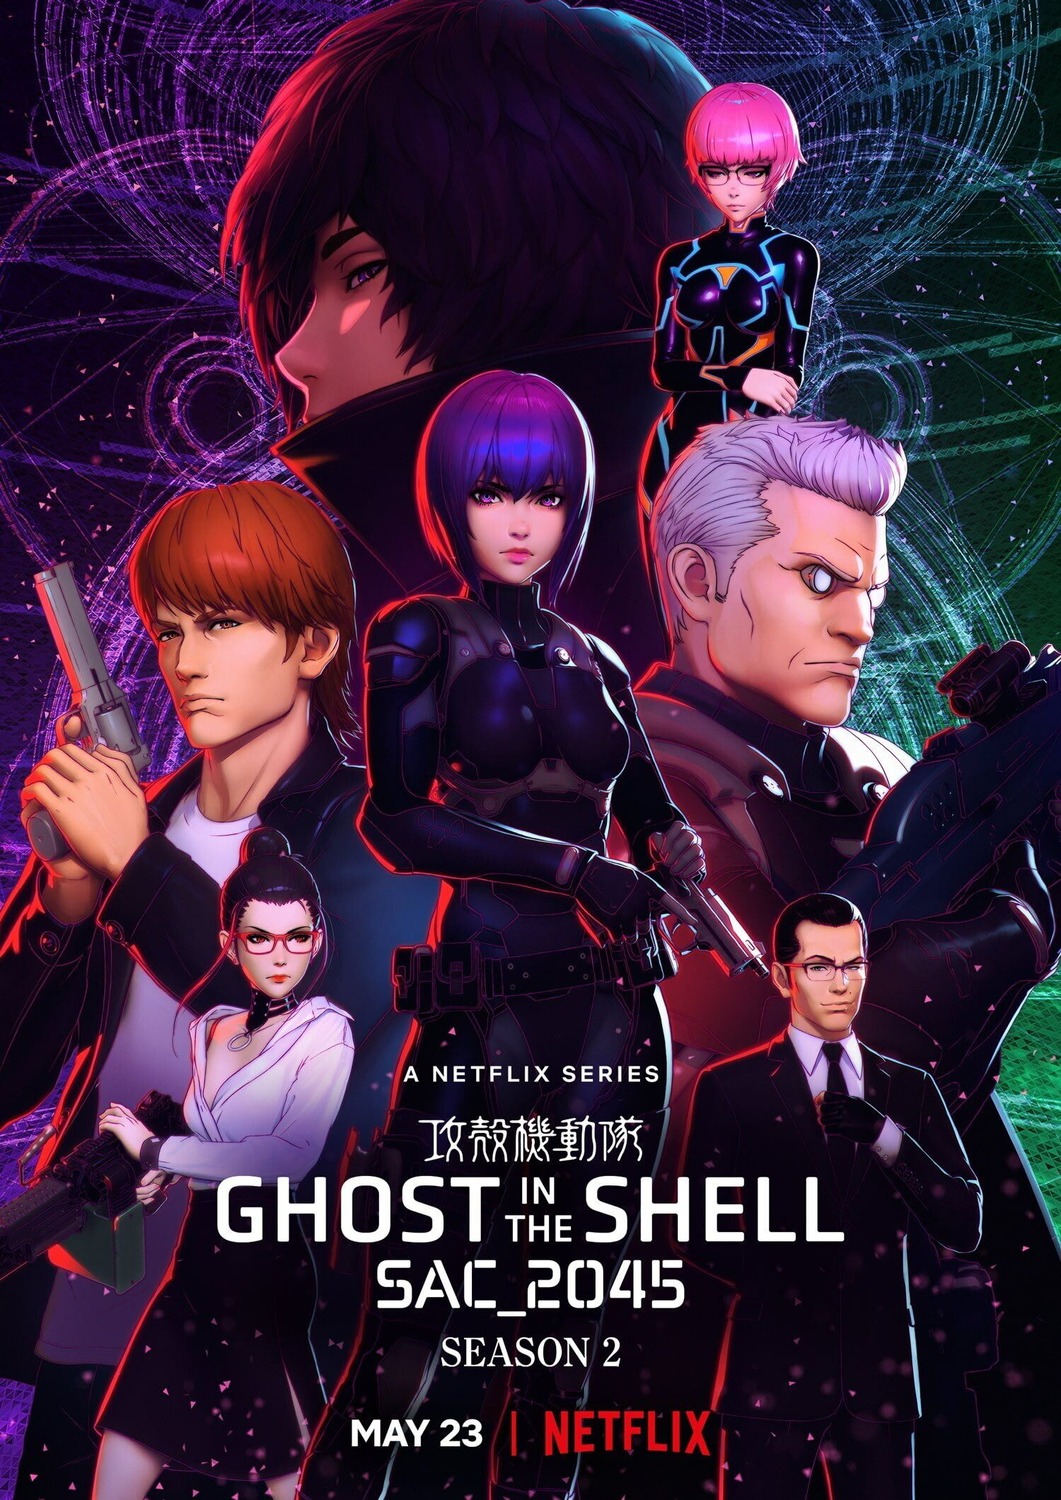 Extra Large TV Poster Image for Ghost in the Shell SAC_2045 (#3 of 5)